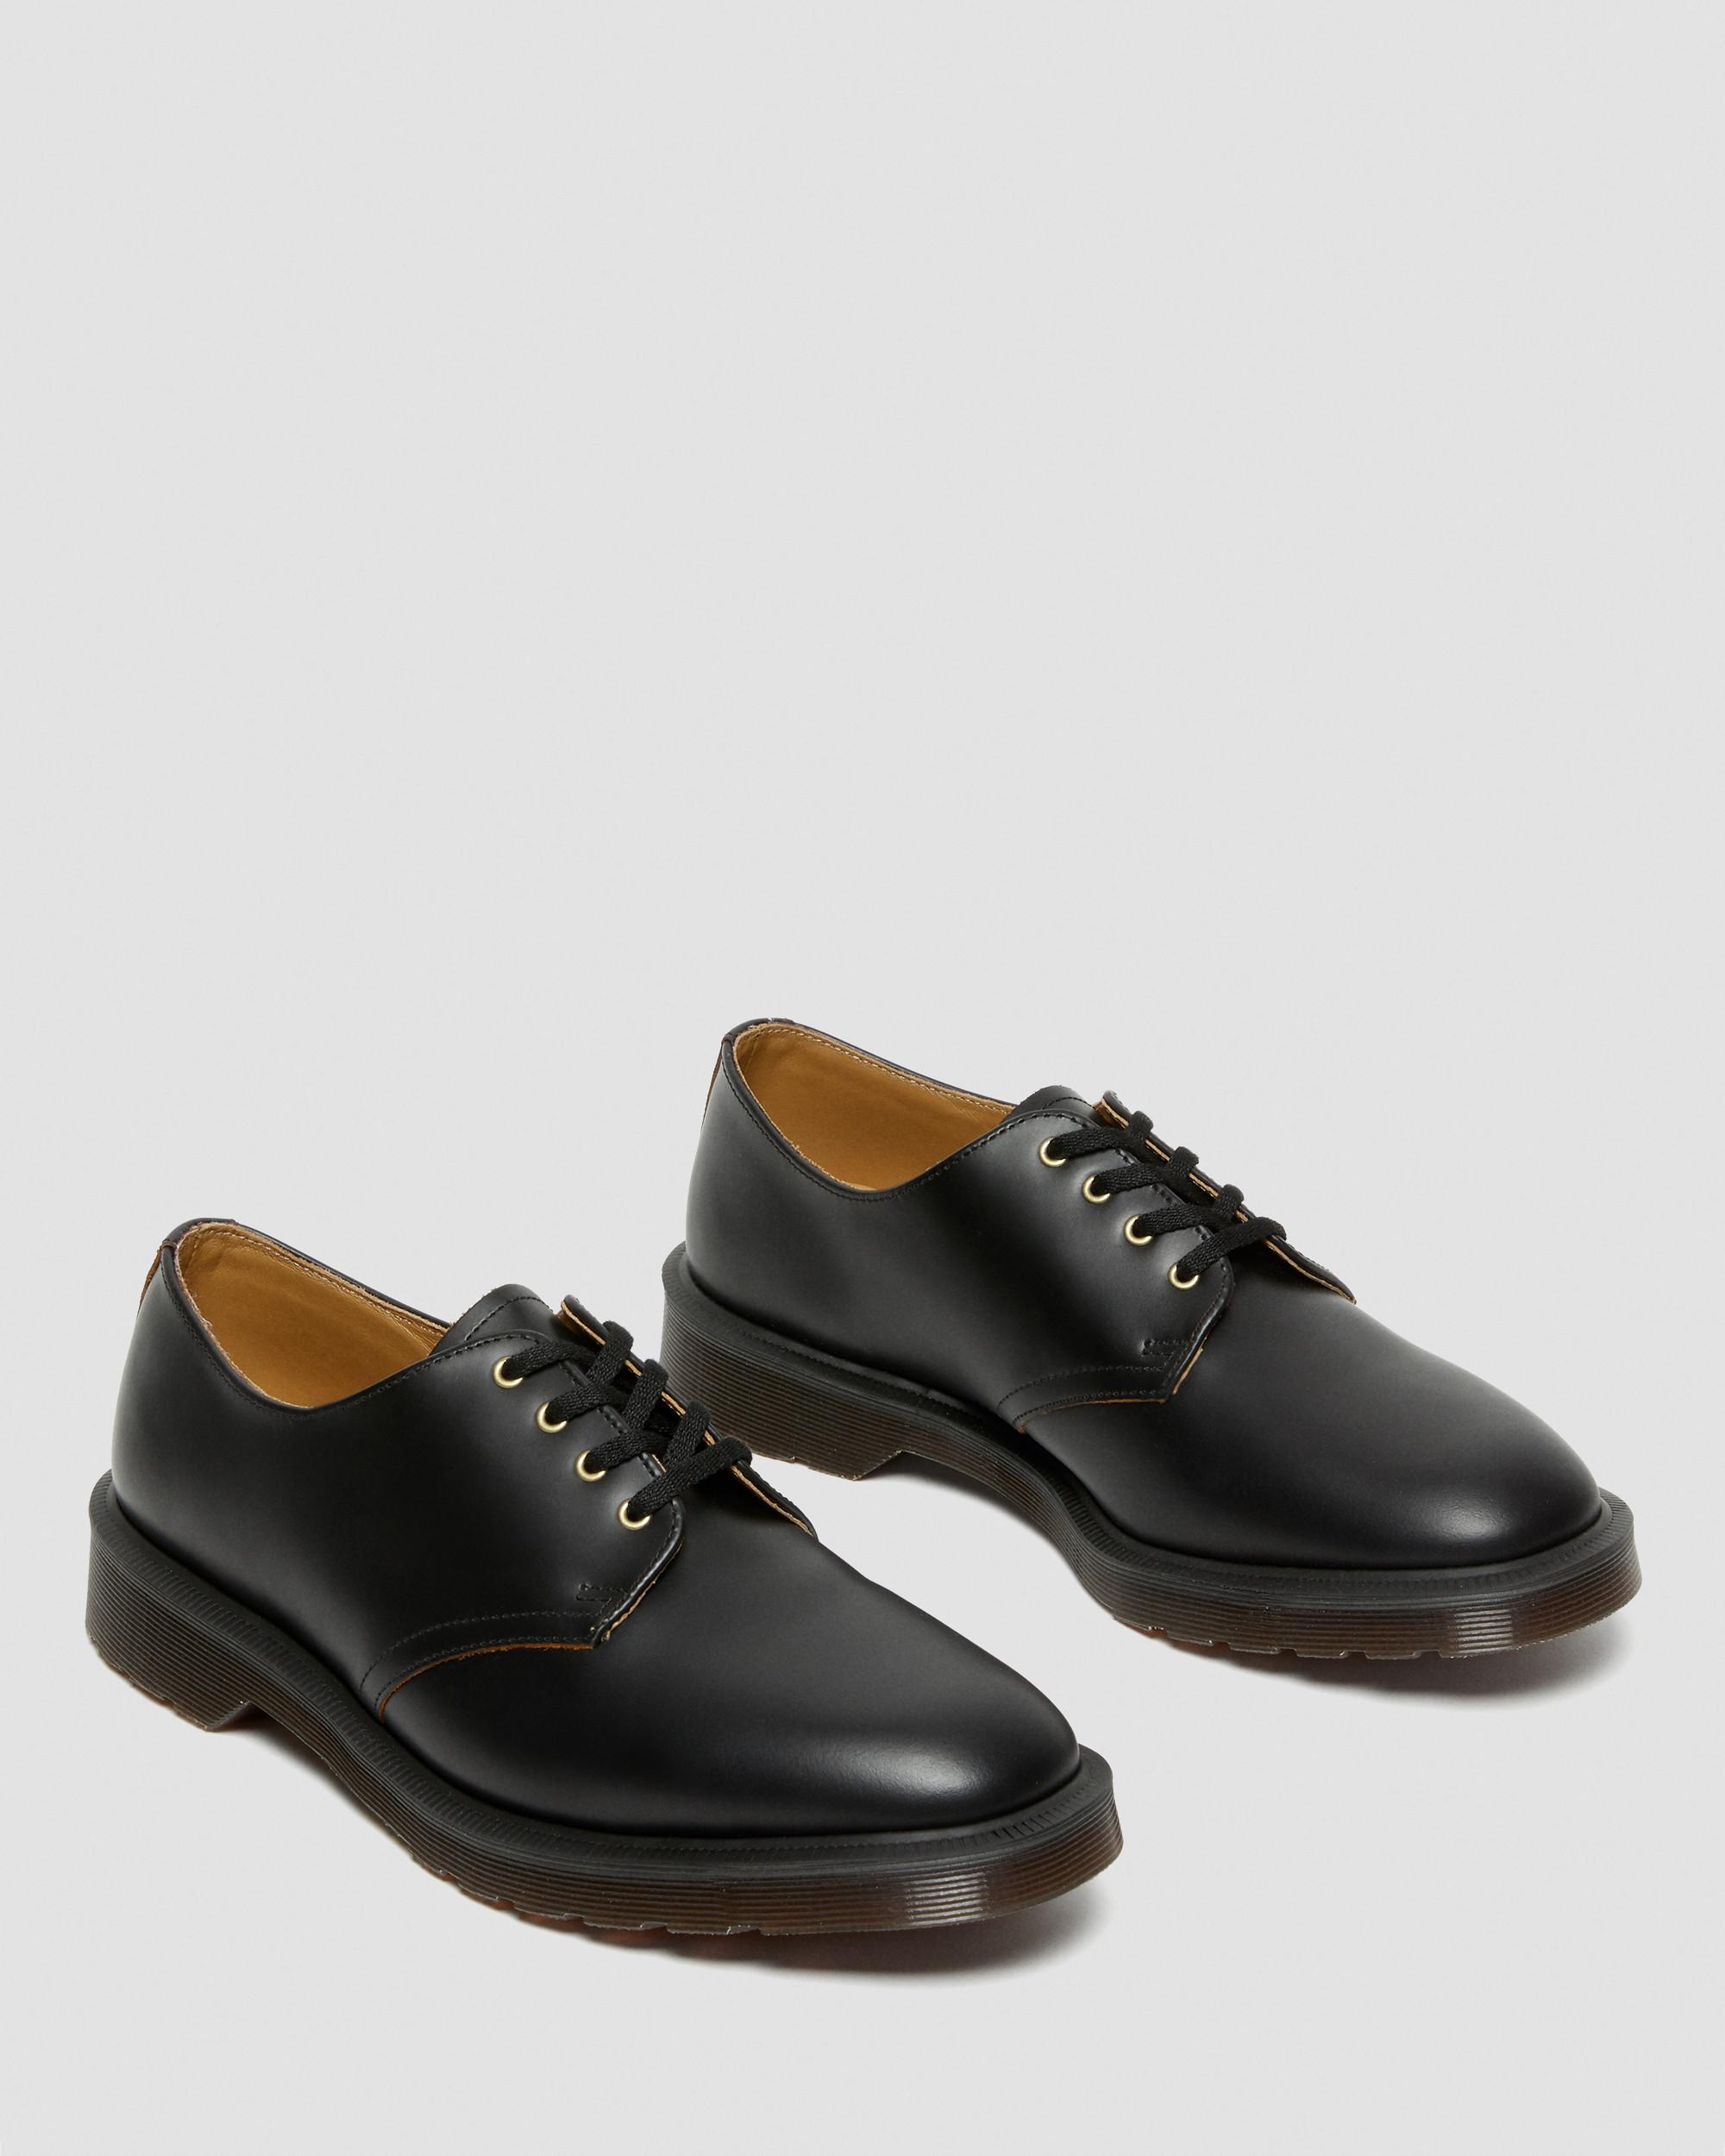 DR MARTENS Smiths Vintage Smooth Leather Dress Shoes